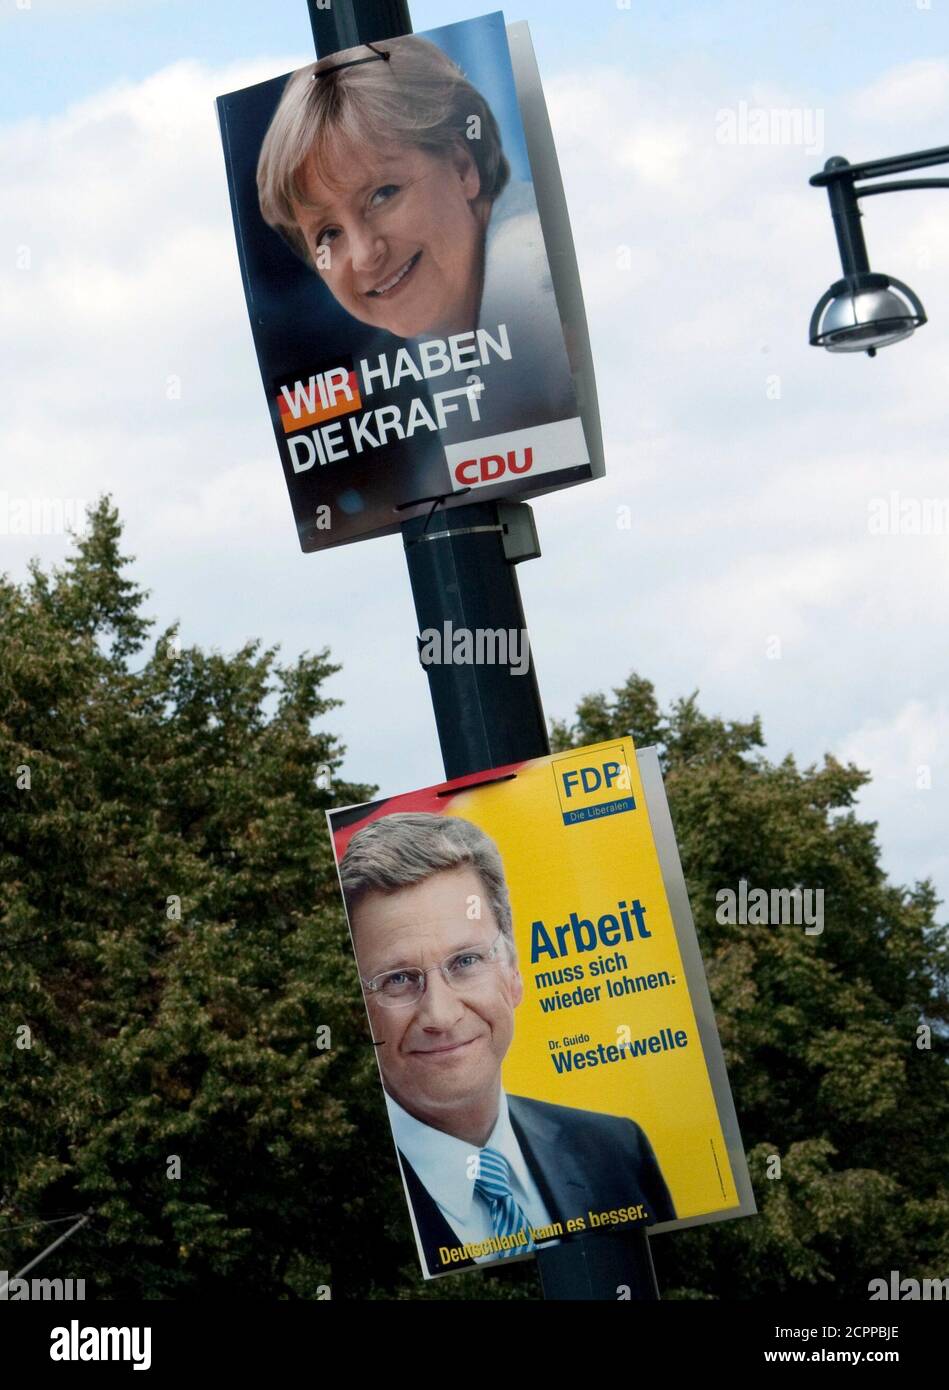 Election posters of the conservative Christian Democratic Union (CDU) party showing German Chancellor Angela Merkel (top) and of the liberal FDP party showing its leader Guido Westerwelle are seen in central Berlin August 18, 2009. Germany will vote in a general election September 27.  REUTERS/Thomas Peter  (GERMANY POLITICS ELECTIONS) Stock Photo